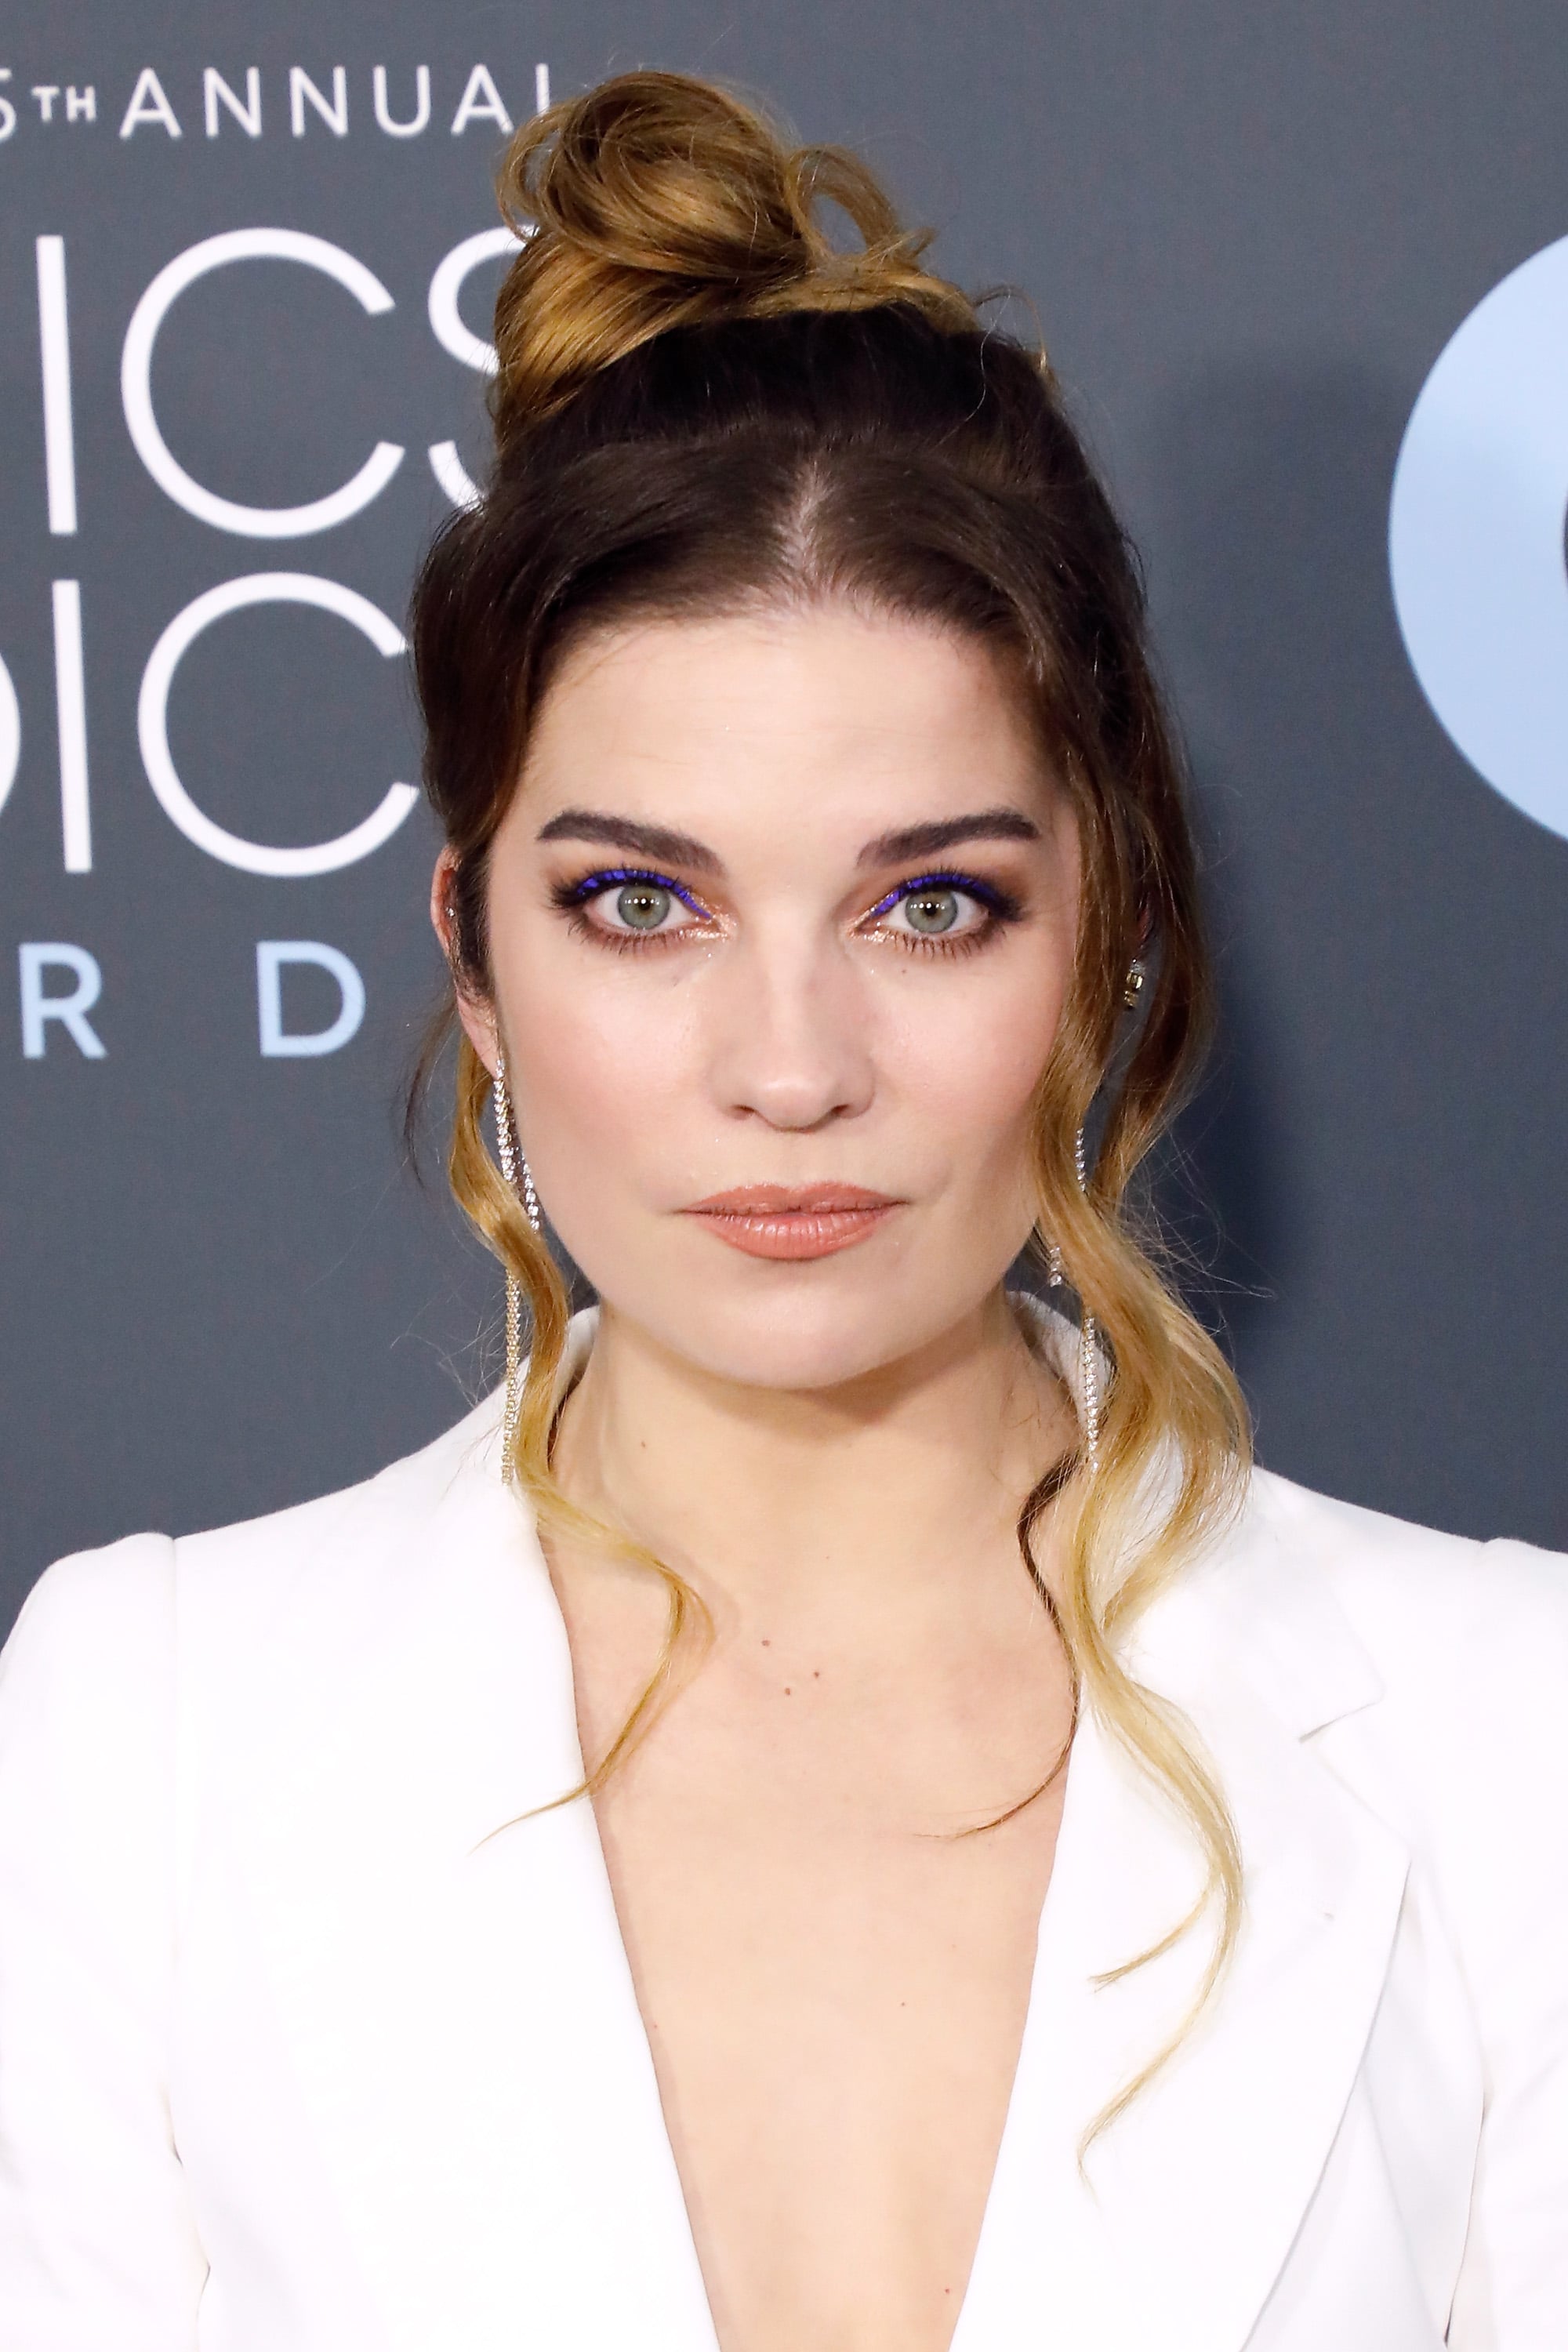 Annie Murphy's Best Hair and Makeup Looks